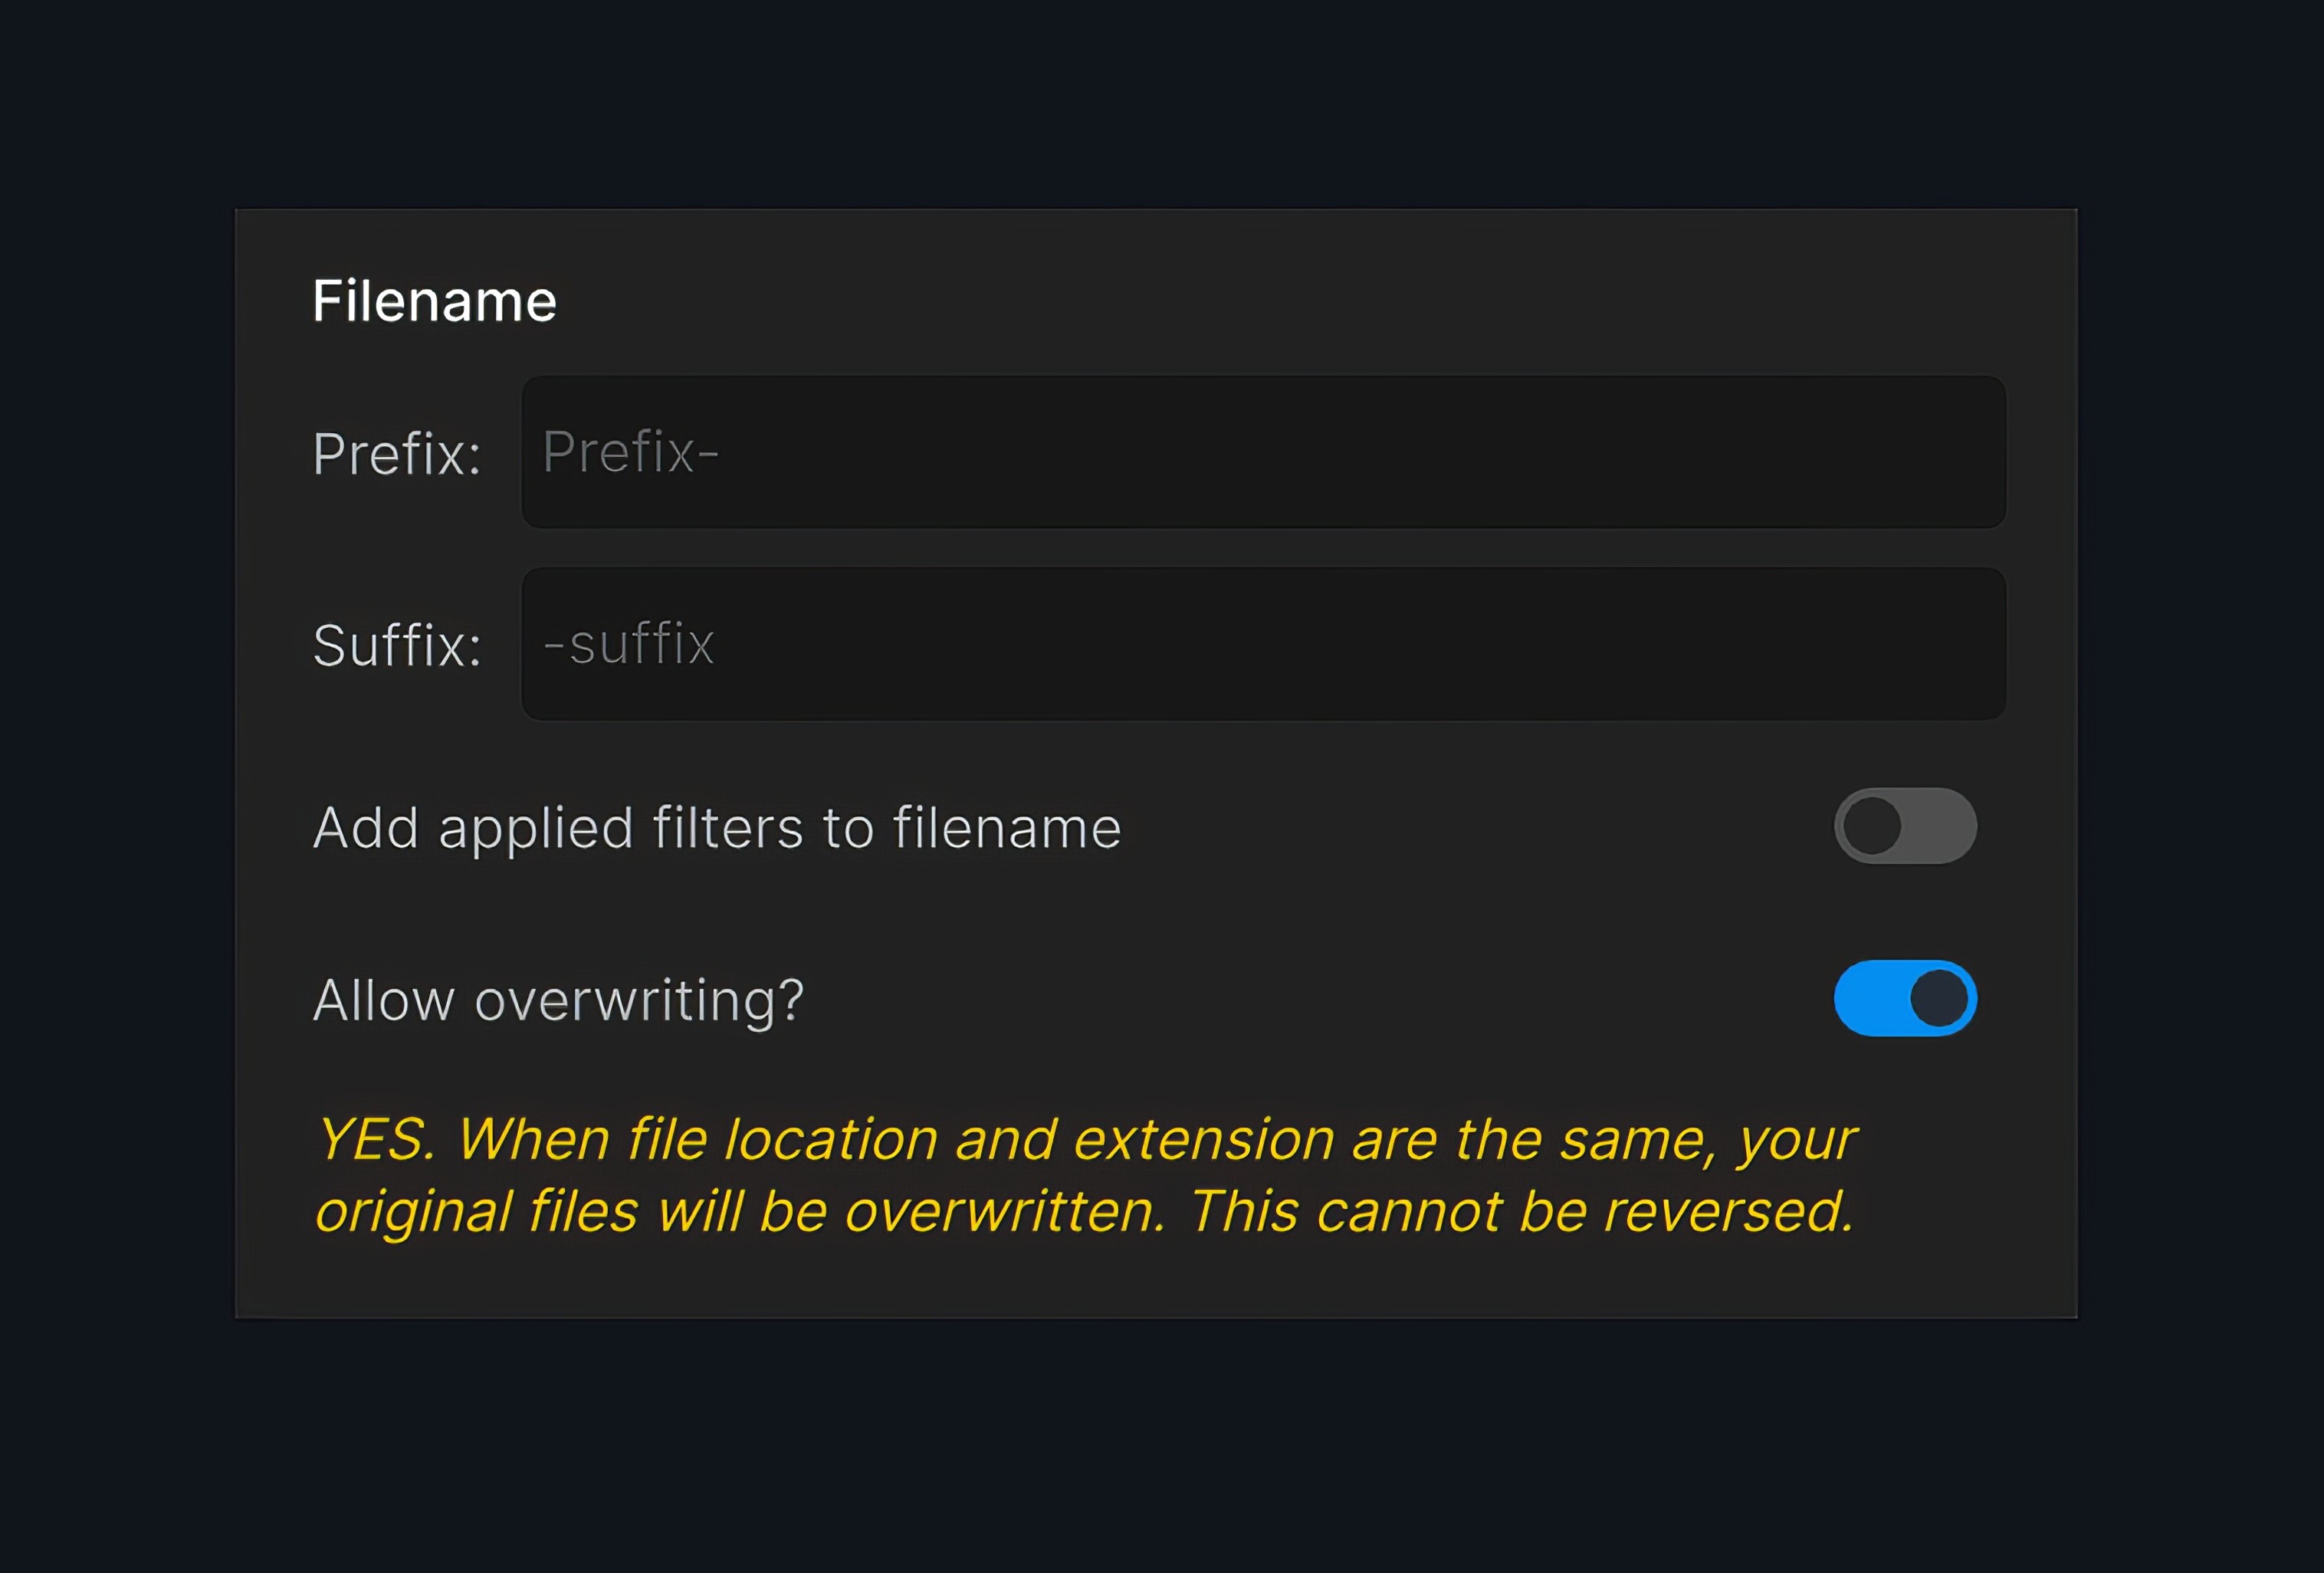 Allow Overwriting